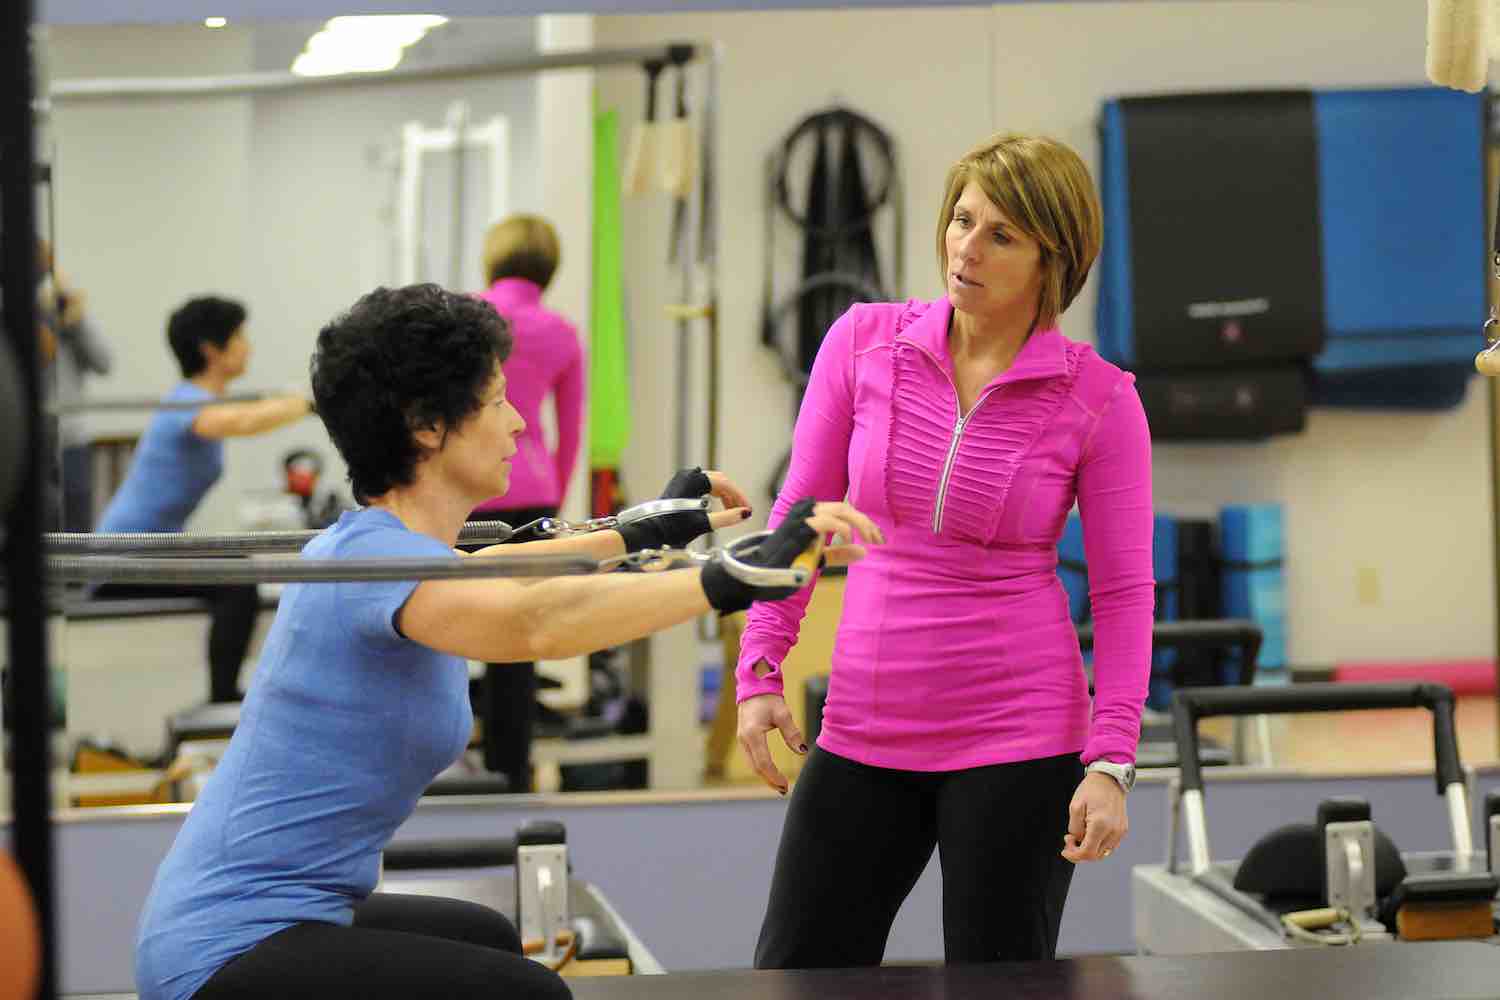 Achive your fitness goals at FitnessWorks, Inc